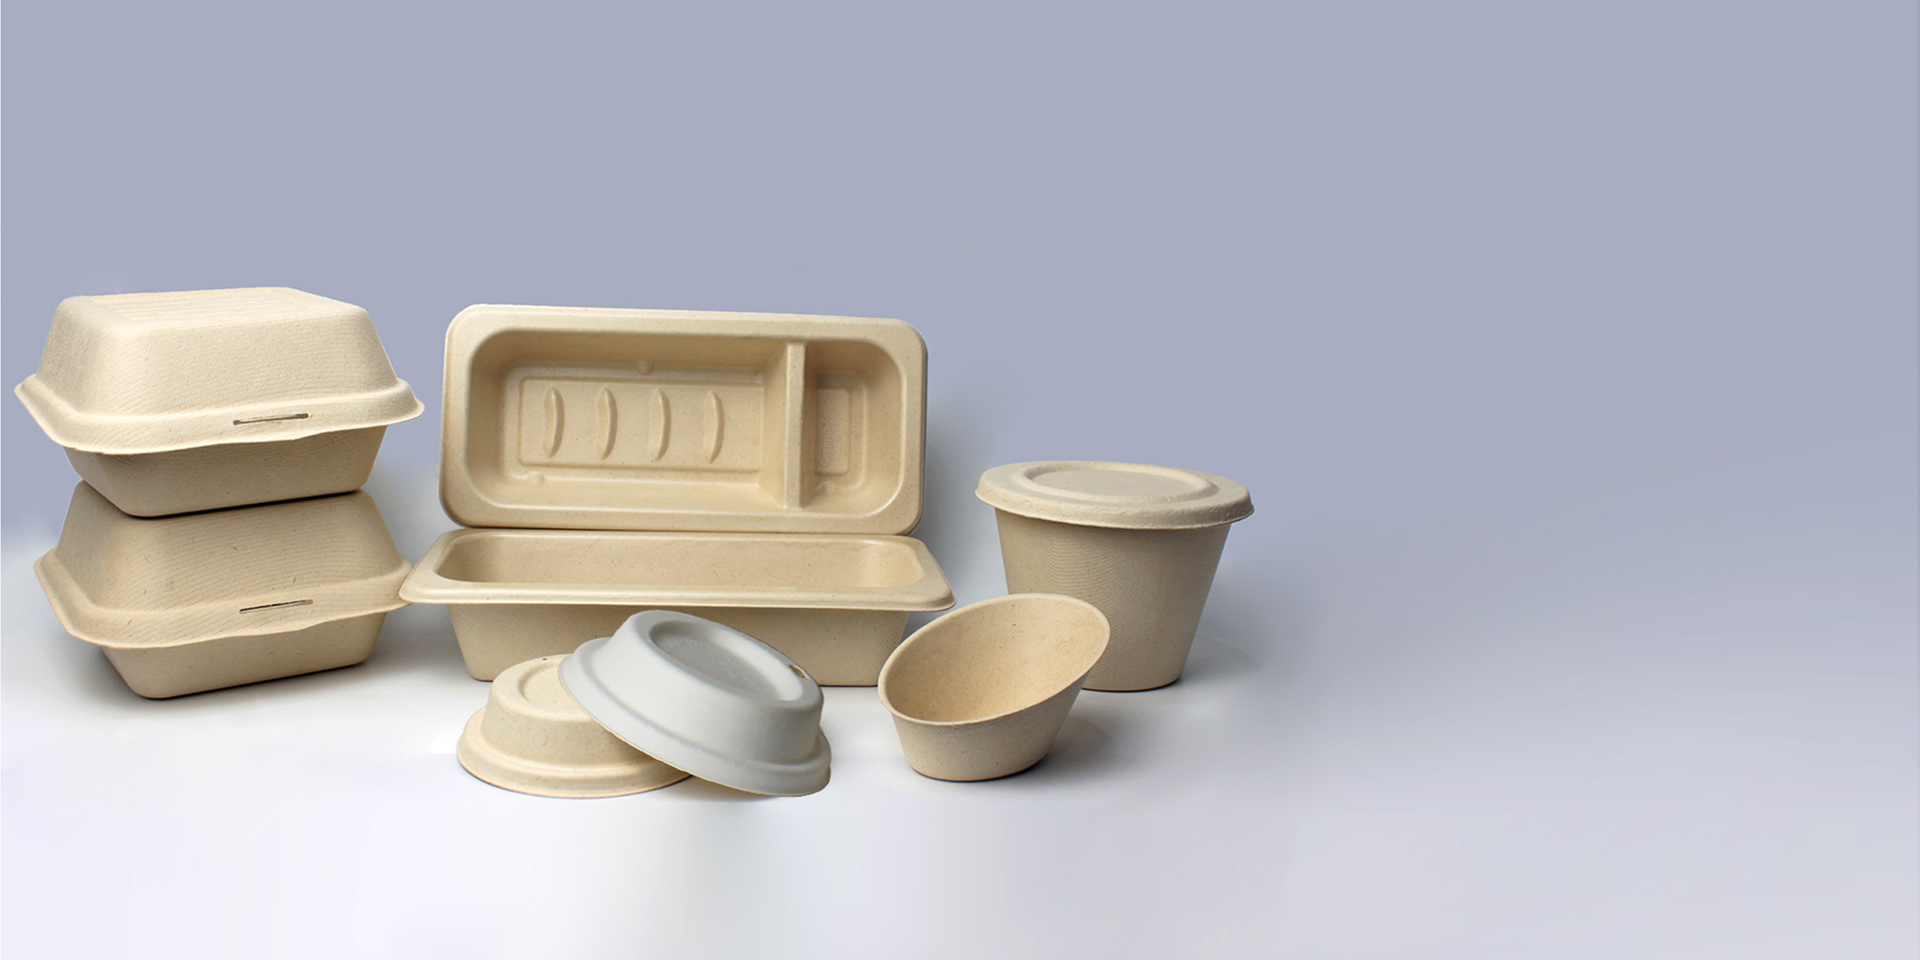 <div class="banner_title"><p>RECYCLABLE ECO-FRIENDLY  FOOD  PACKAGING</p></div>